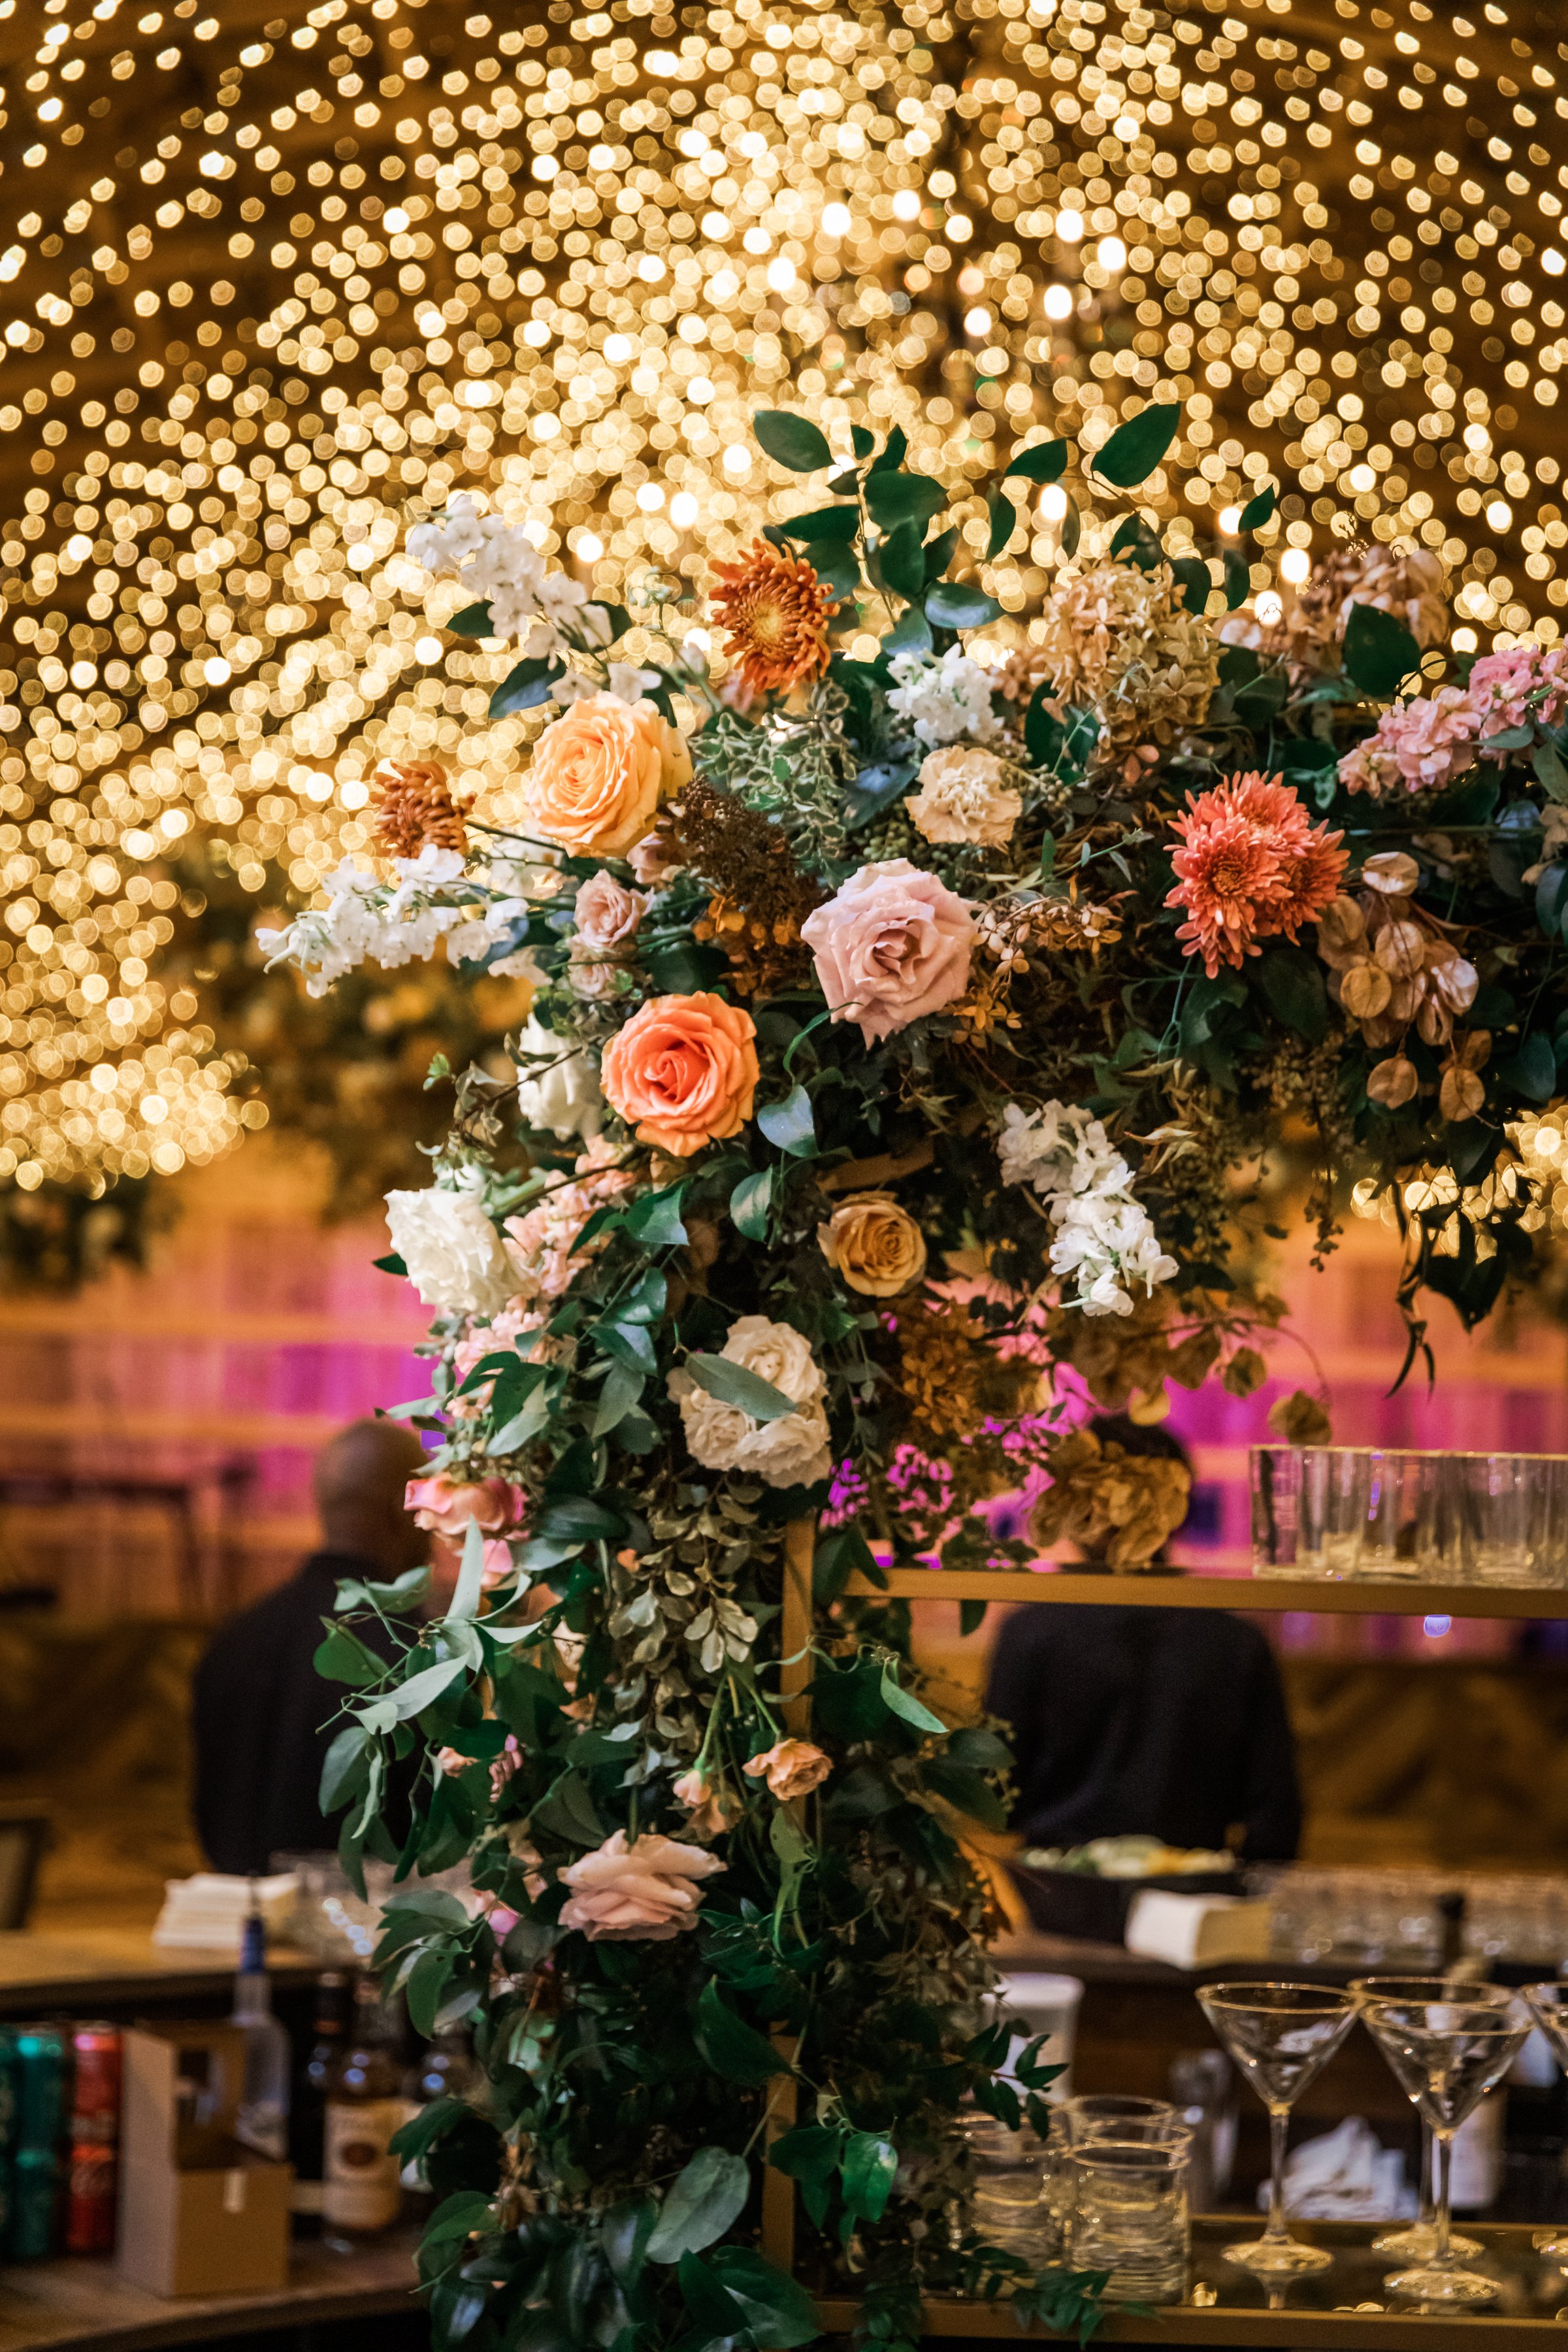 Stunning fall floral installation frame the bar area of this autumnal wedding. Hues of blush, terra cotta, copper, toffee, yellow, and other neutrals are highlighted with dahlias, roses, and double brownie tulips. Designed by Rosemary and Finch in Na